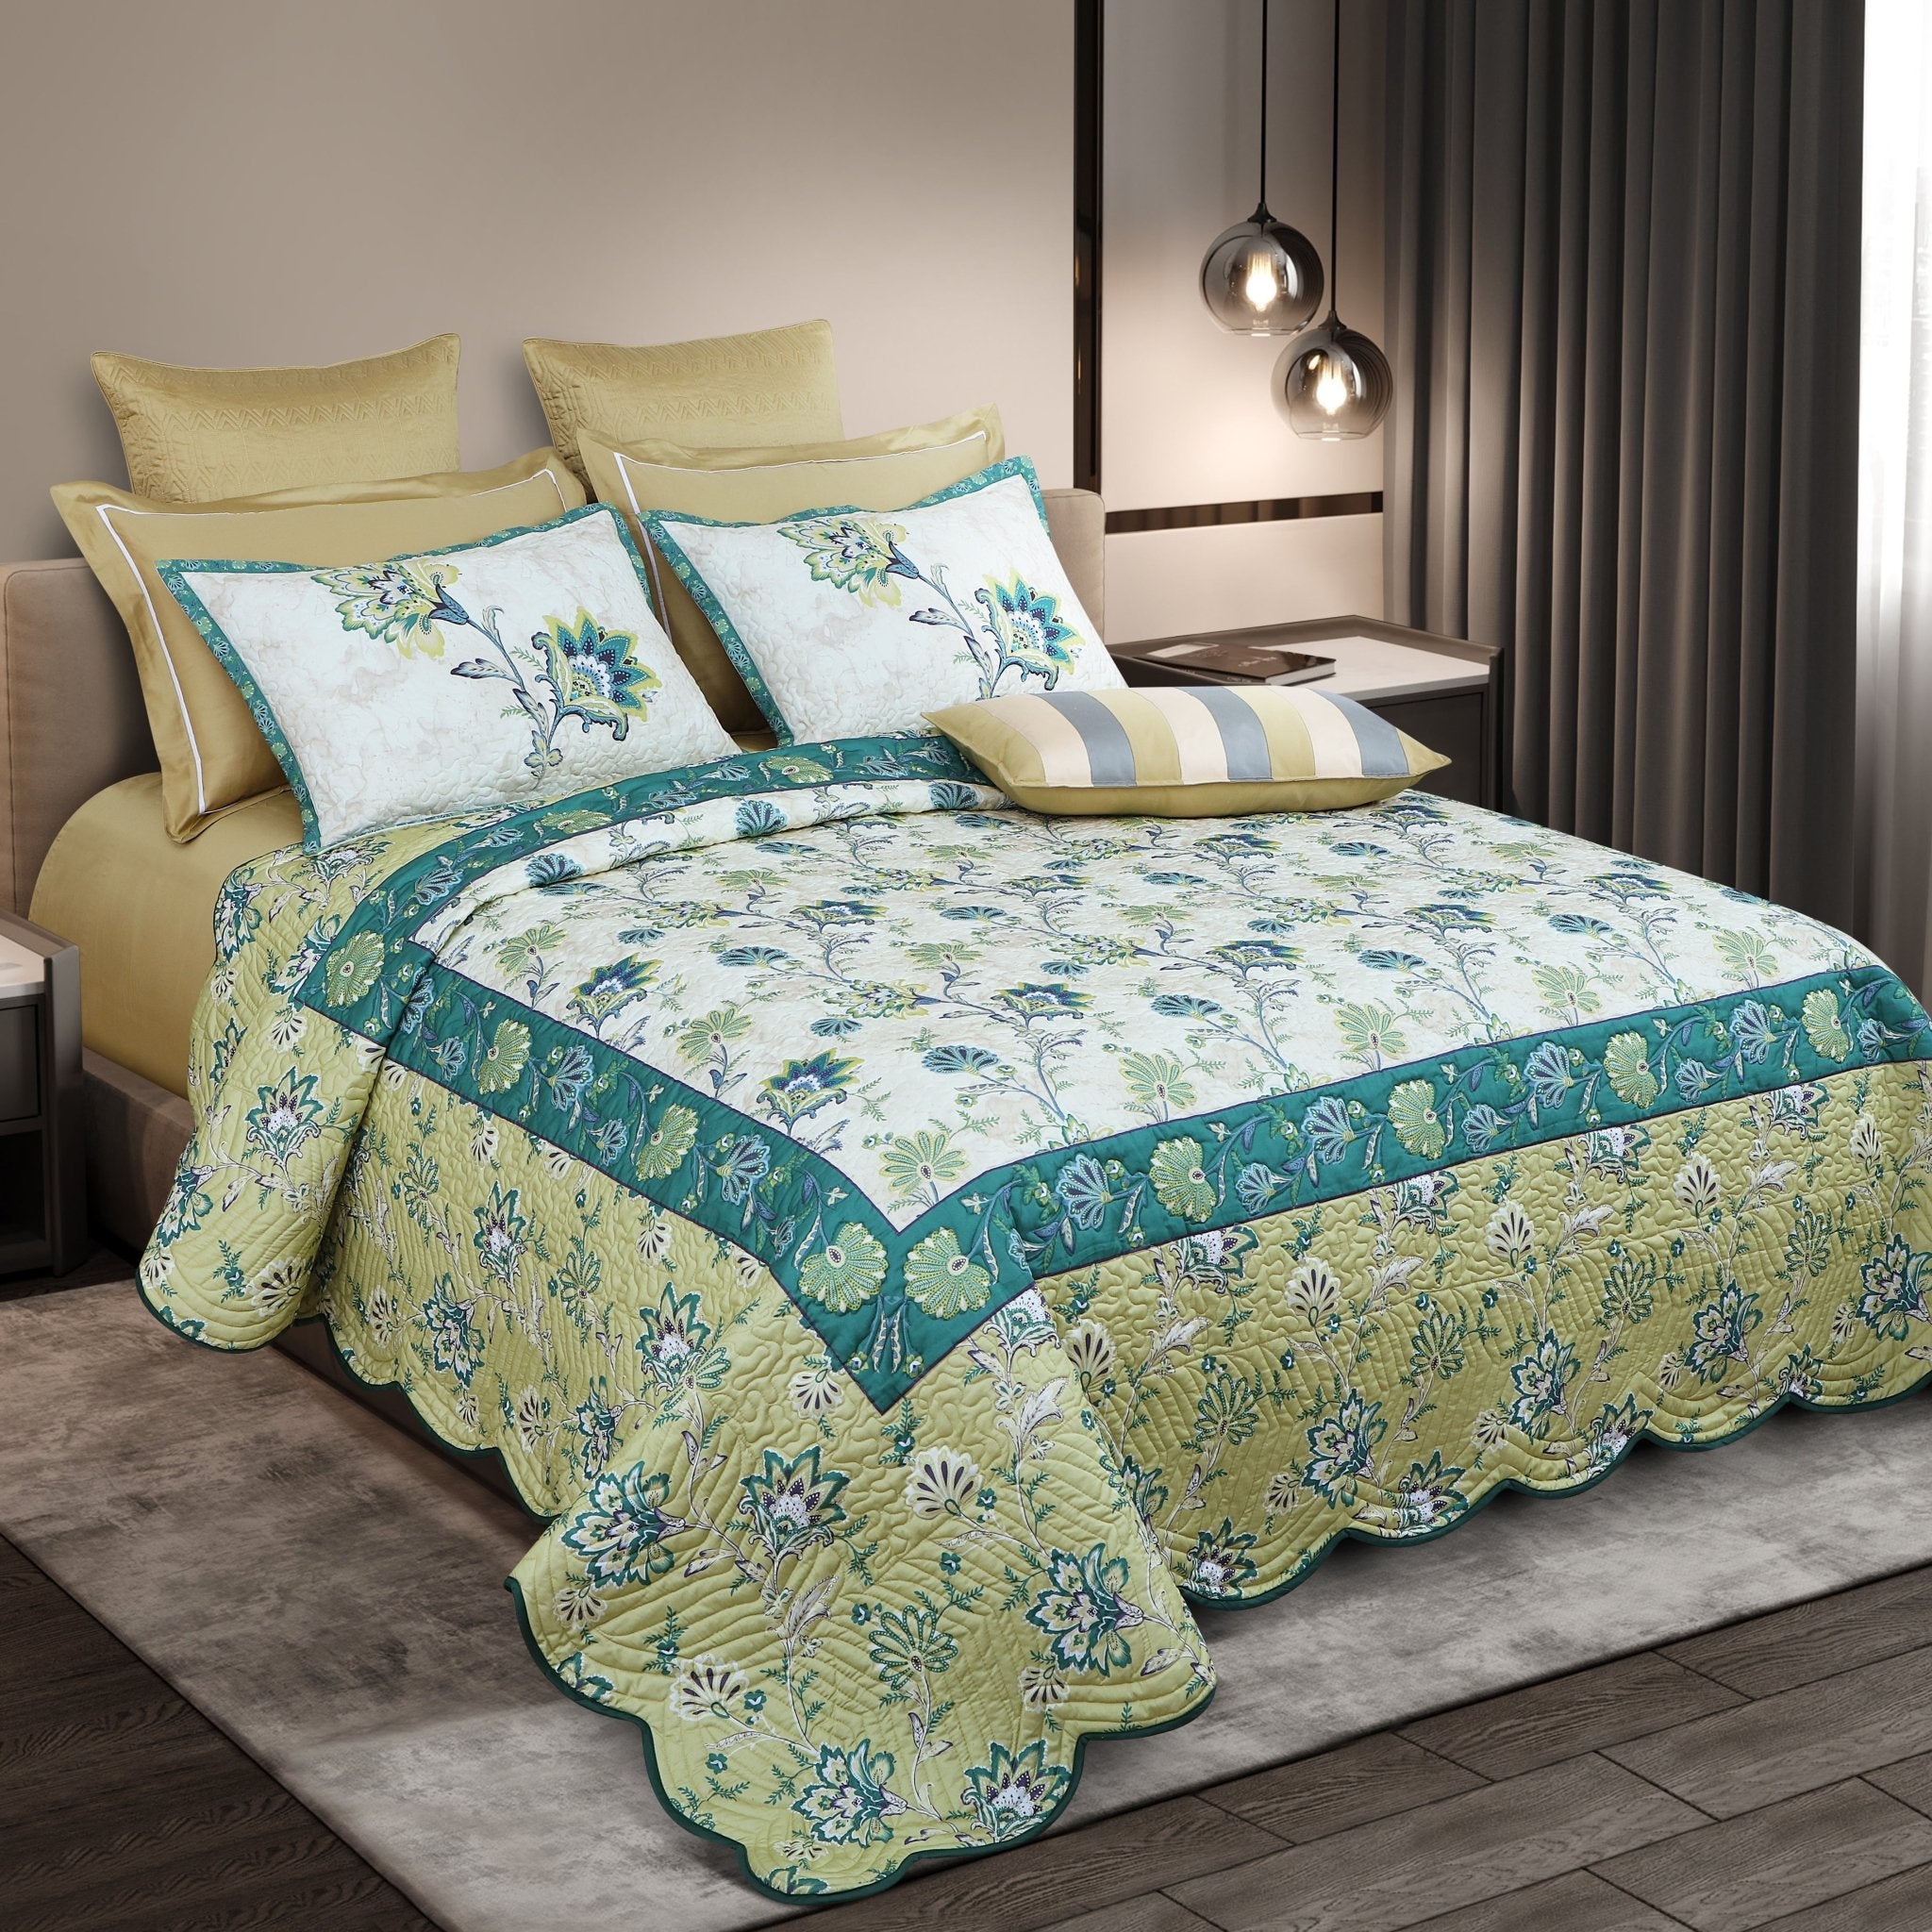 Malako Fleur Botanique Green King Size 100% Cotton Quilted Bed Cover Set - MALAKO